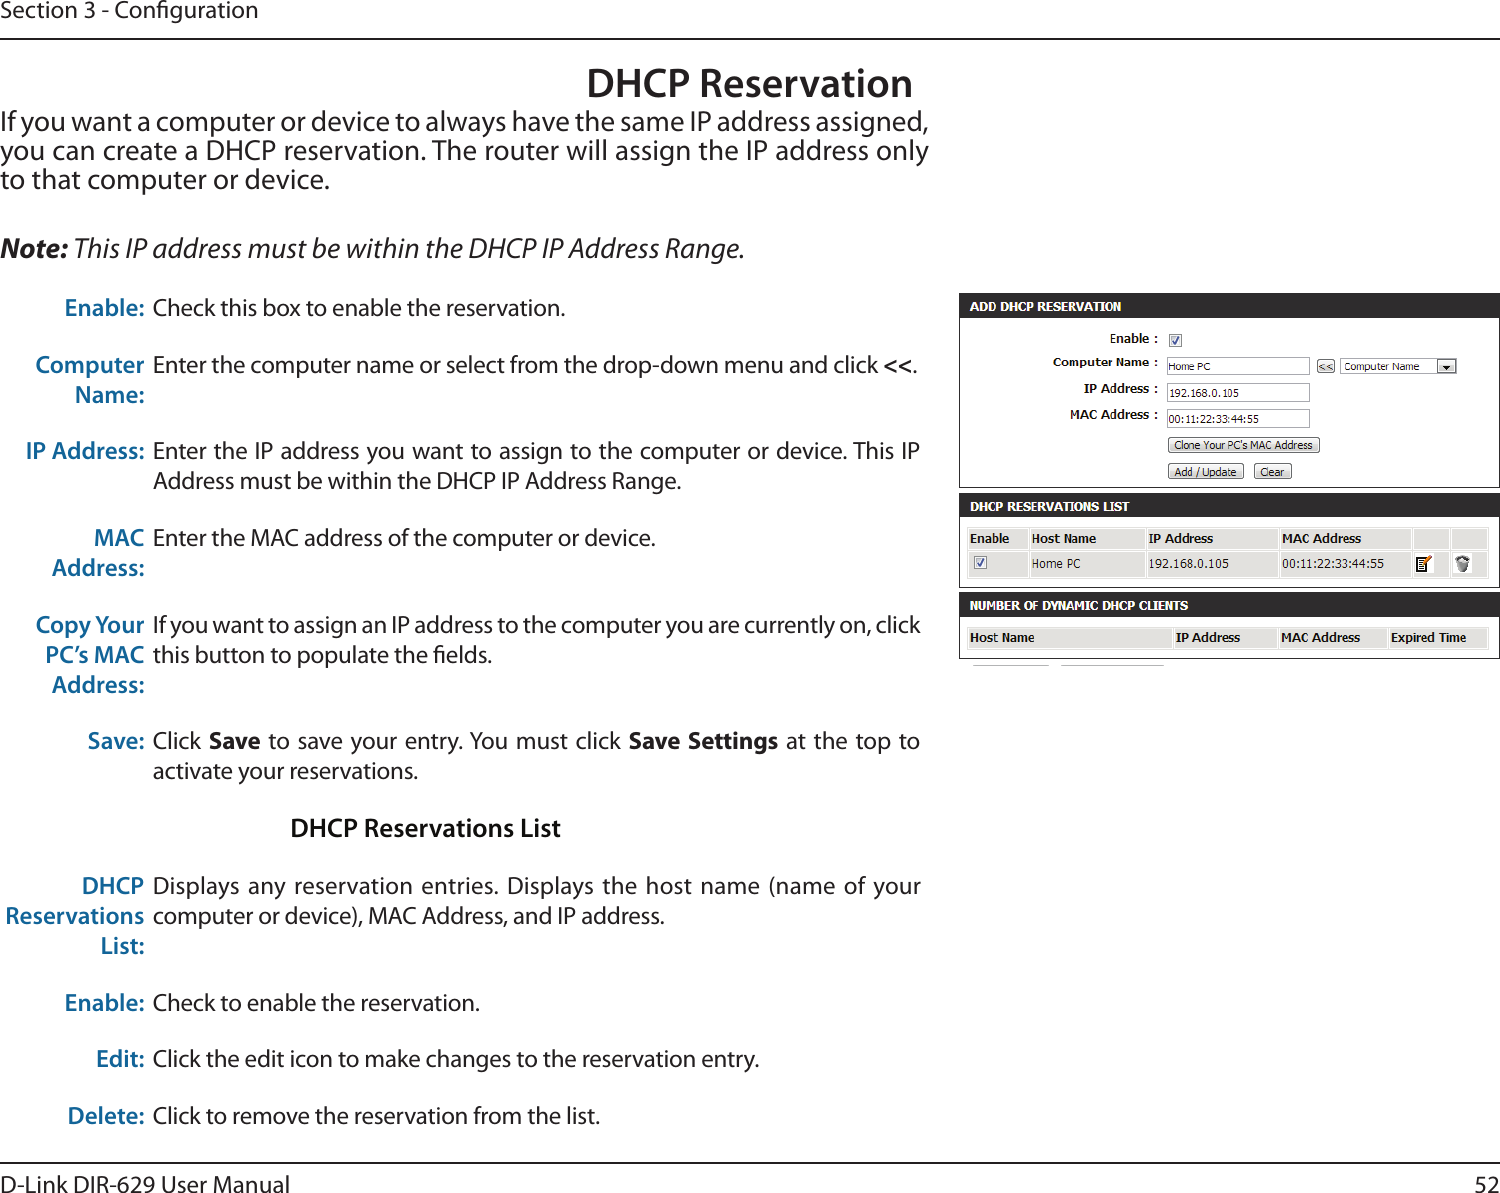 52D-Link DIR-629 User ManualSection 3 - CongurationDHCP ReservationIf you want a computer or device to always have the same IP address assigned, you can create a DHCP reservation. The router will assign the IP address only to that computer or device. Note: This IP address must be within the DHCP IP Address Range.Enable: Check this box to enable the reservation.Computer Name:Enter the computer name or select from the drop-down menu and click &lt;&lt;.IP Address: Enter the IP address you want to assign to the computer or device. This IP MAC Address:Enter the MAC address of the computer or device.Copy Your PC’s MAC Address:If you want to assign an IP address to the computer you are currently on, click this button to populate the elds. Save: Click SaveSave Settings at the top to activate your reservations. DHCP Reservations ListDHCP Reservations List:Displays any reservation entries. Displays the host name (name of your computer or device), MAC Address, and IP address.Enable: Check to enable the reservation.Edit: Click the edit icon to make changes to the reservation entry.Delete: Click to remove the reservation from the list.